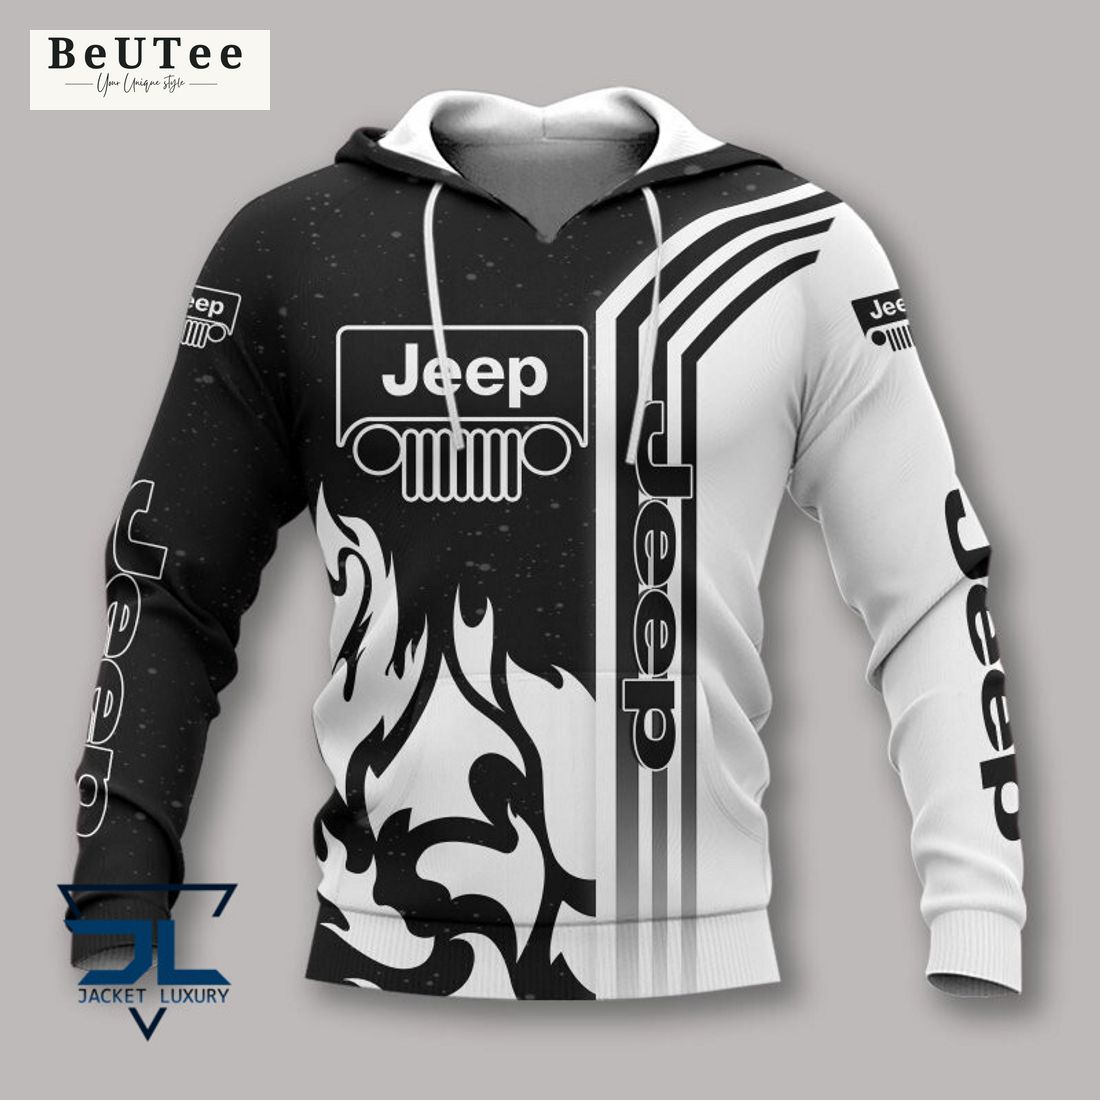 Jeep Motor Car 3D Tshirt Polo My favourite picture of yours